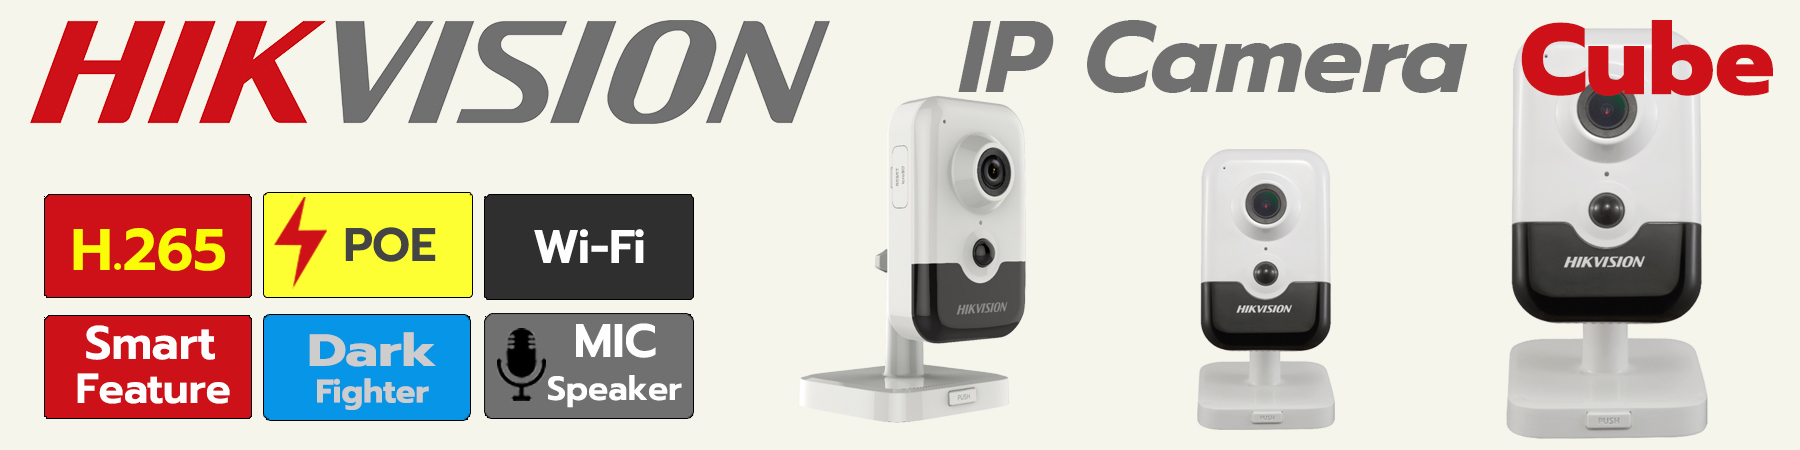 Hikvision Cube IPC, กล้อง Hikvision Cube, กล้อง Hikvision, Hikvision PIR, Hikvision Cube Network Camera, DS-2CD2421G0-IW, DS-2CD2423G0-IW, DS-2CD2425FWD-IW